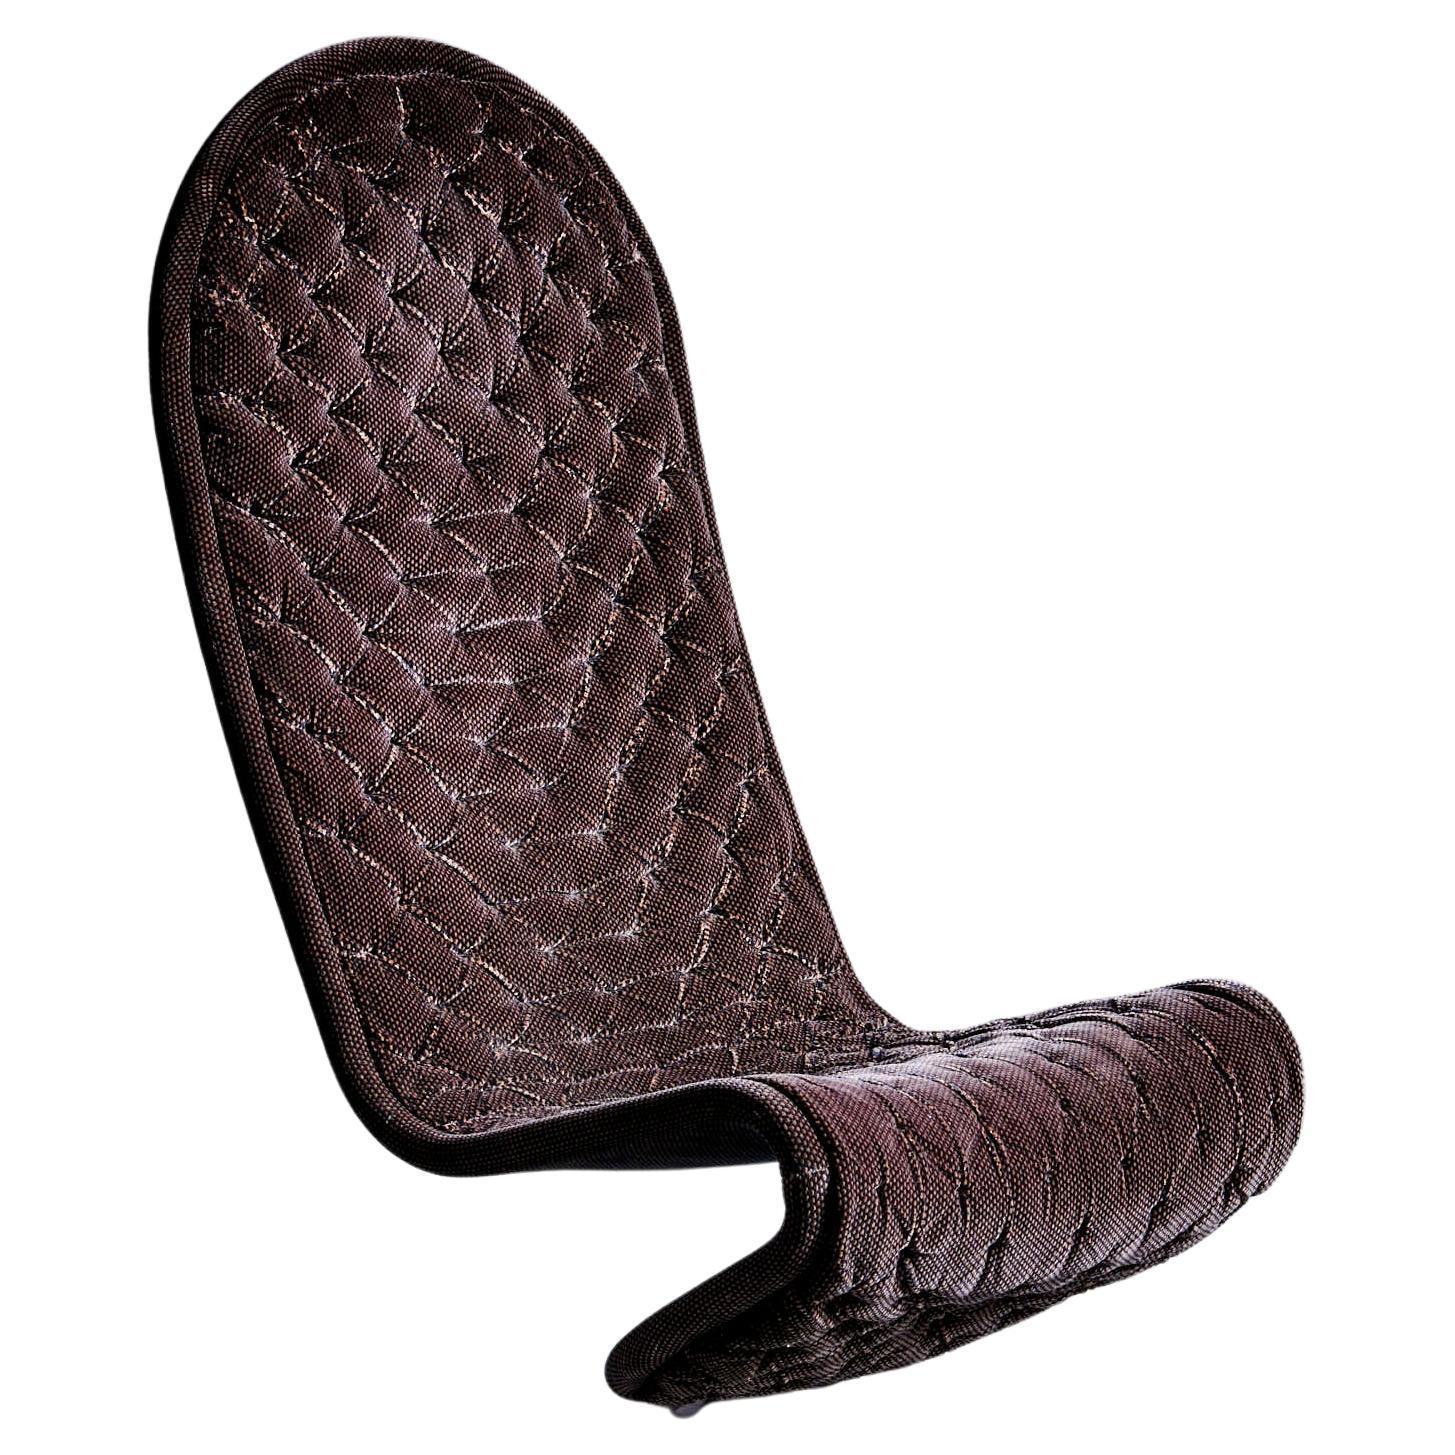 System 1-2-3 Lounge Chair Deluxe Highback,, Round base with a fully upholstered lounge chair seat. 